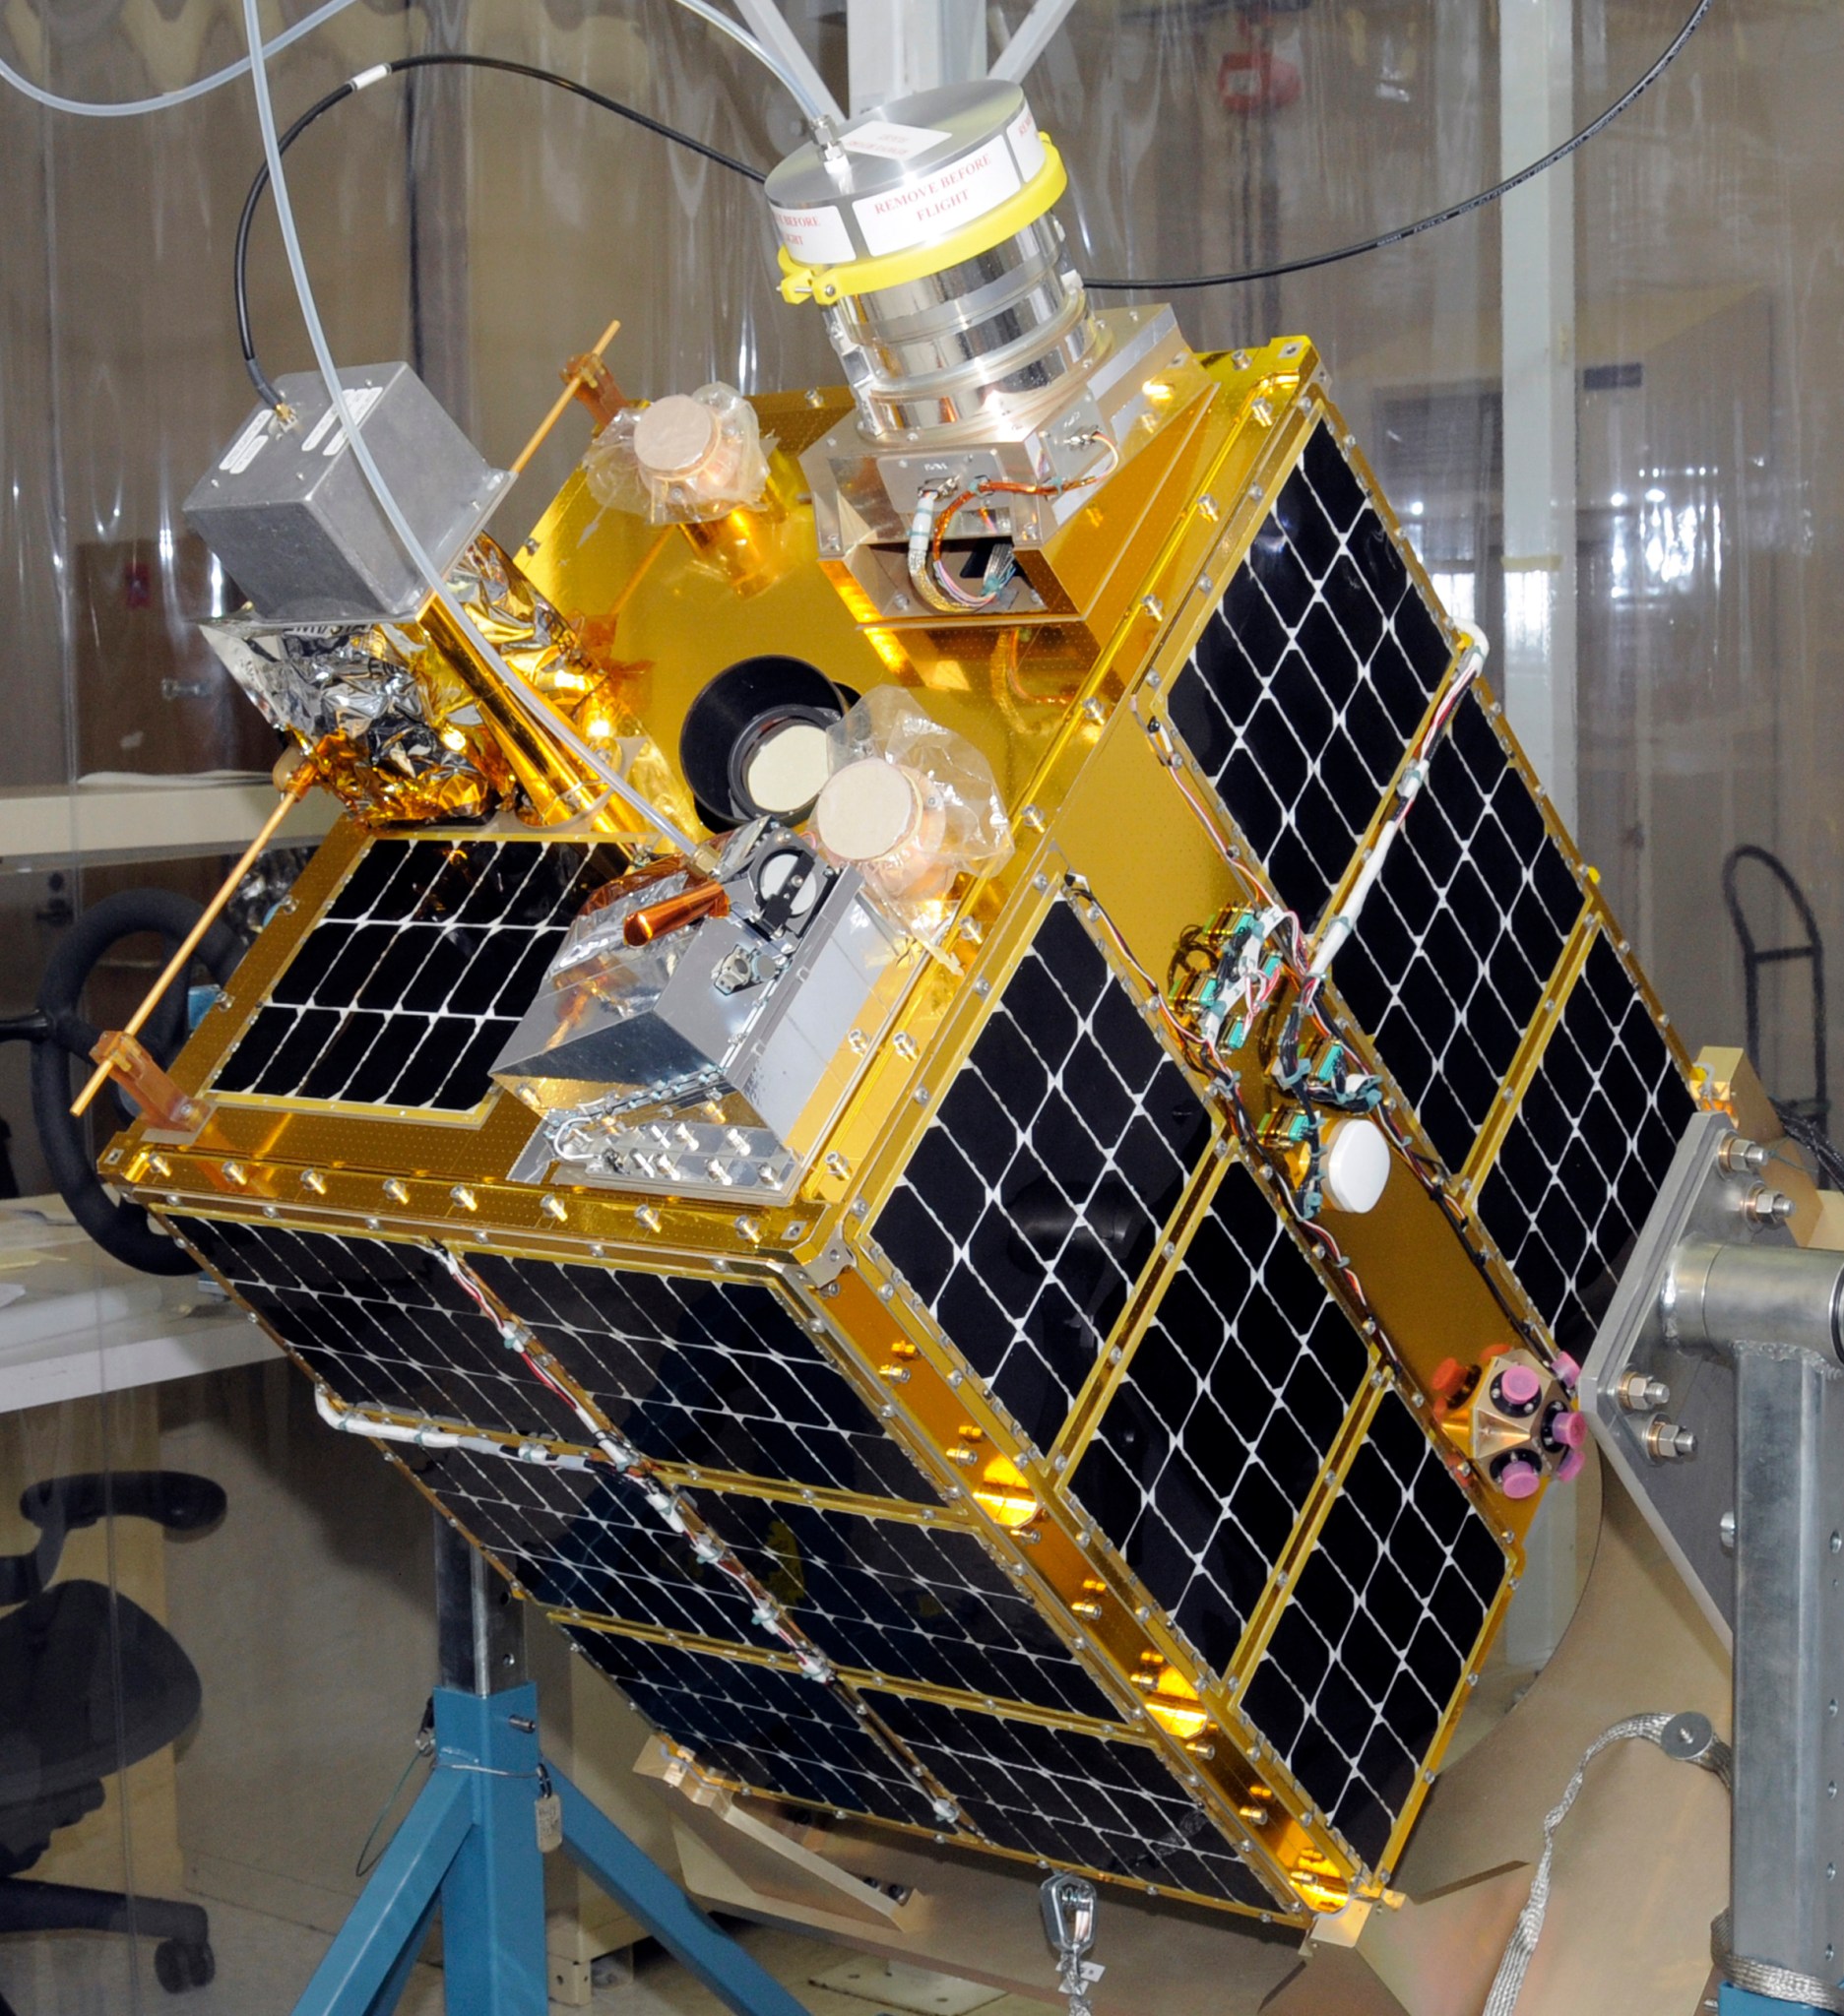 This week in 2010, NASA’s Fast, Affordable, Science and Technology Satellite mission launched from Kodiak, Alaska. 